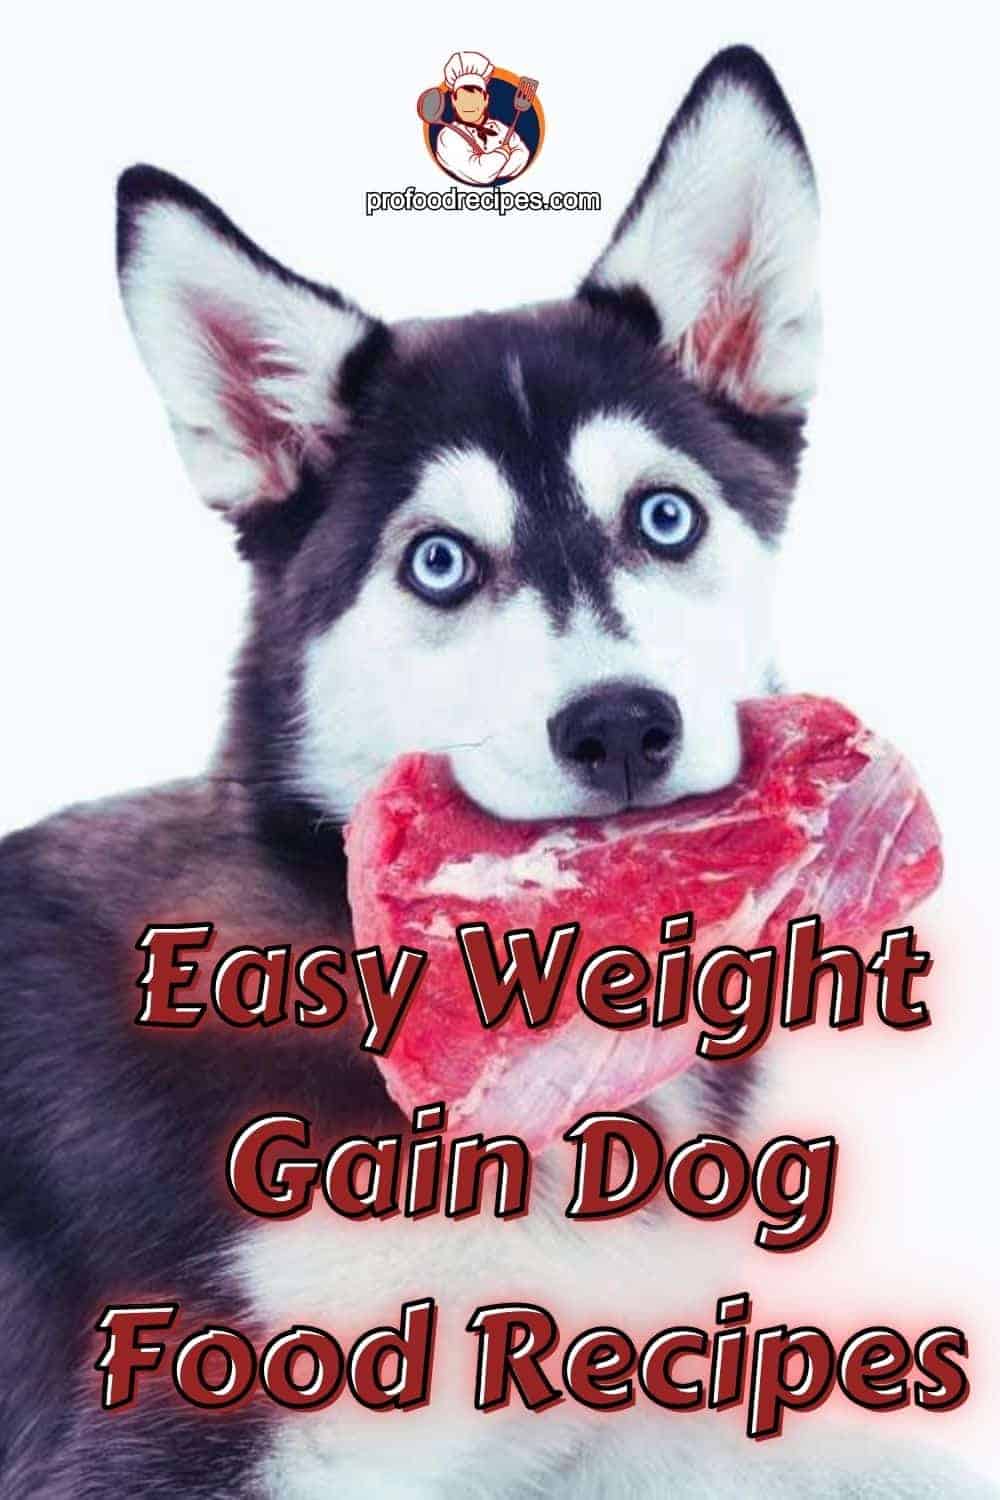 what can i feed my dog to gain weight fast